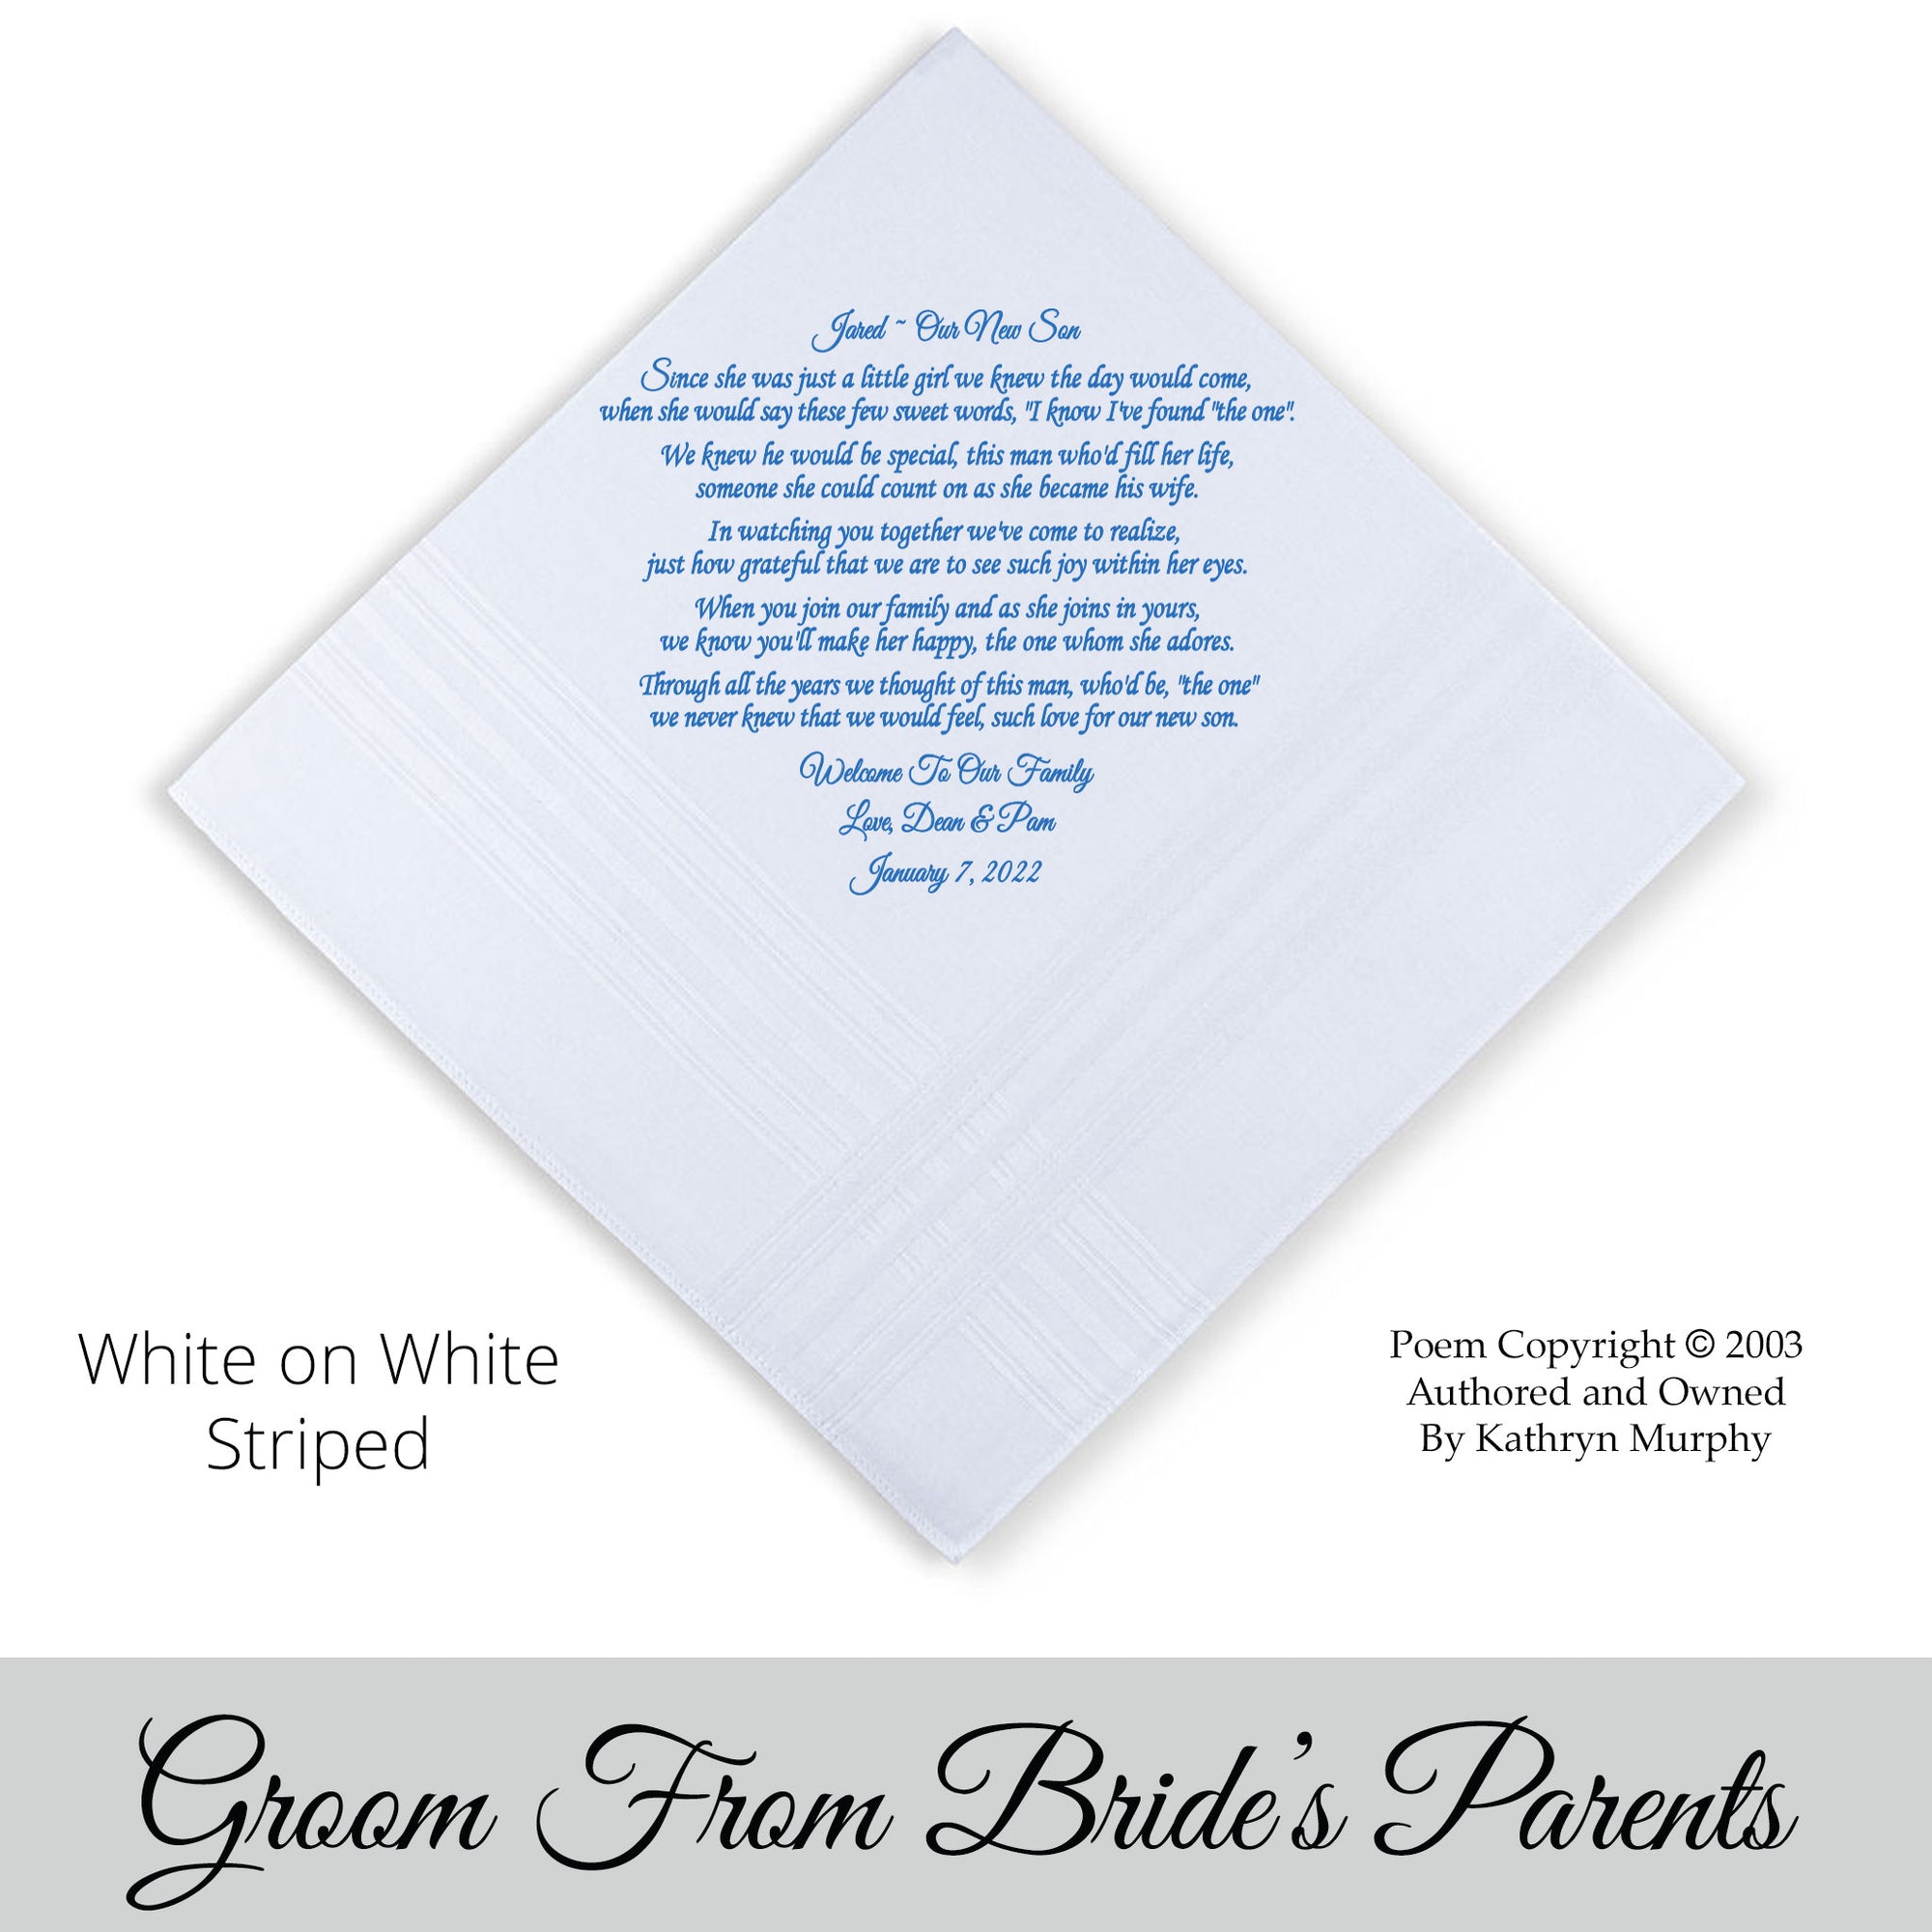 Gift for the Groom from his bride's parents. wedding hankie with the poem Our New Son